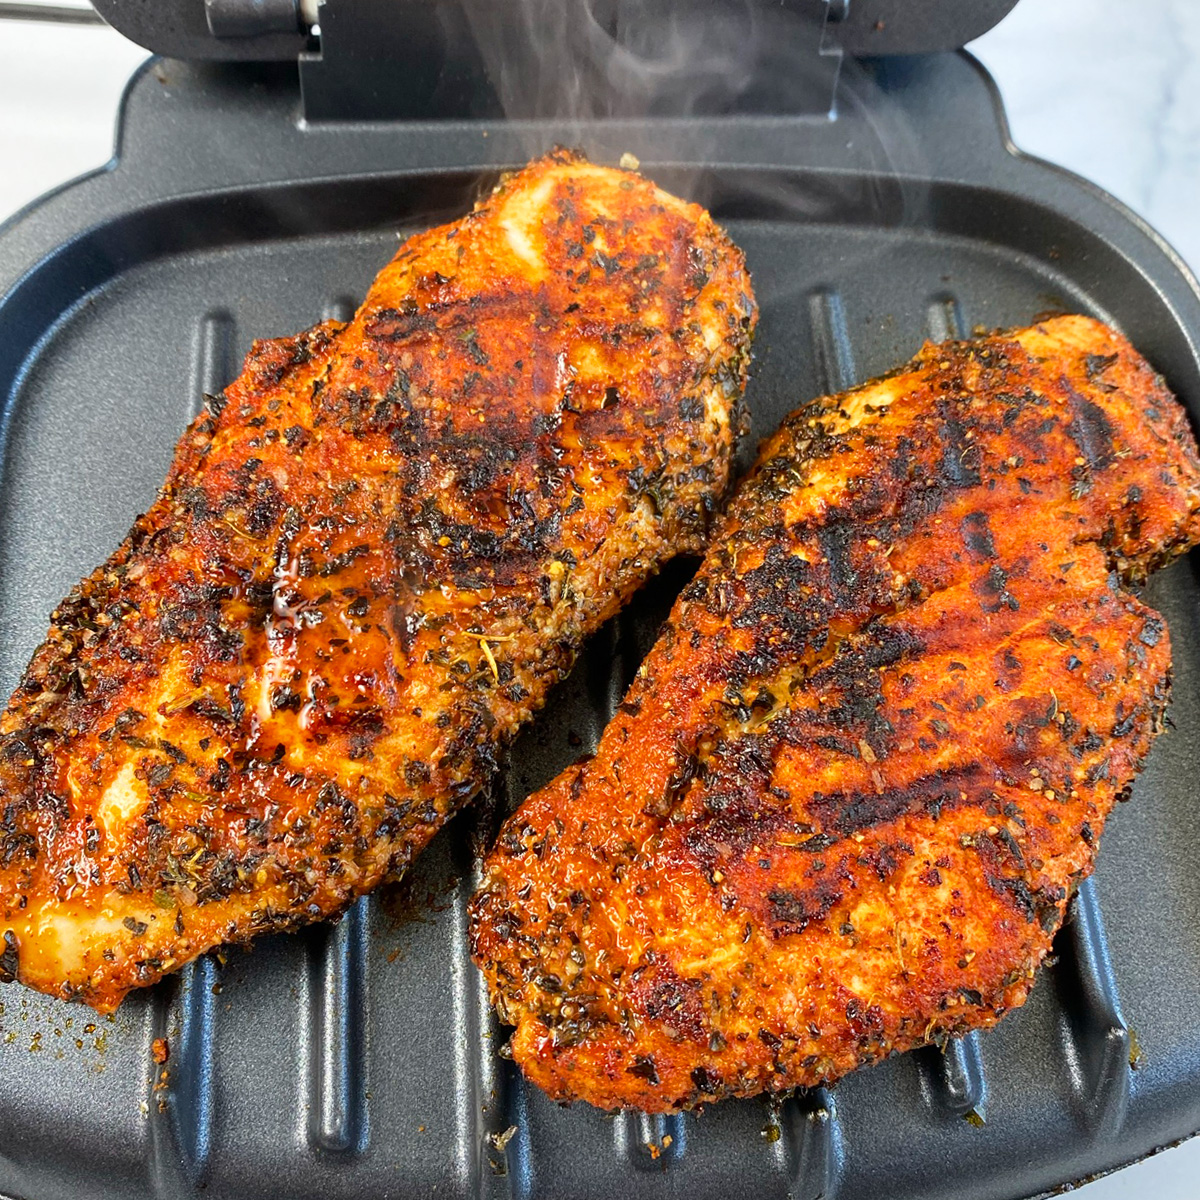 How to grill chicken breast on george foreman grill